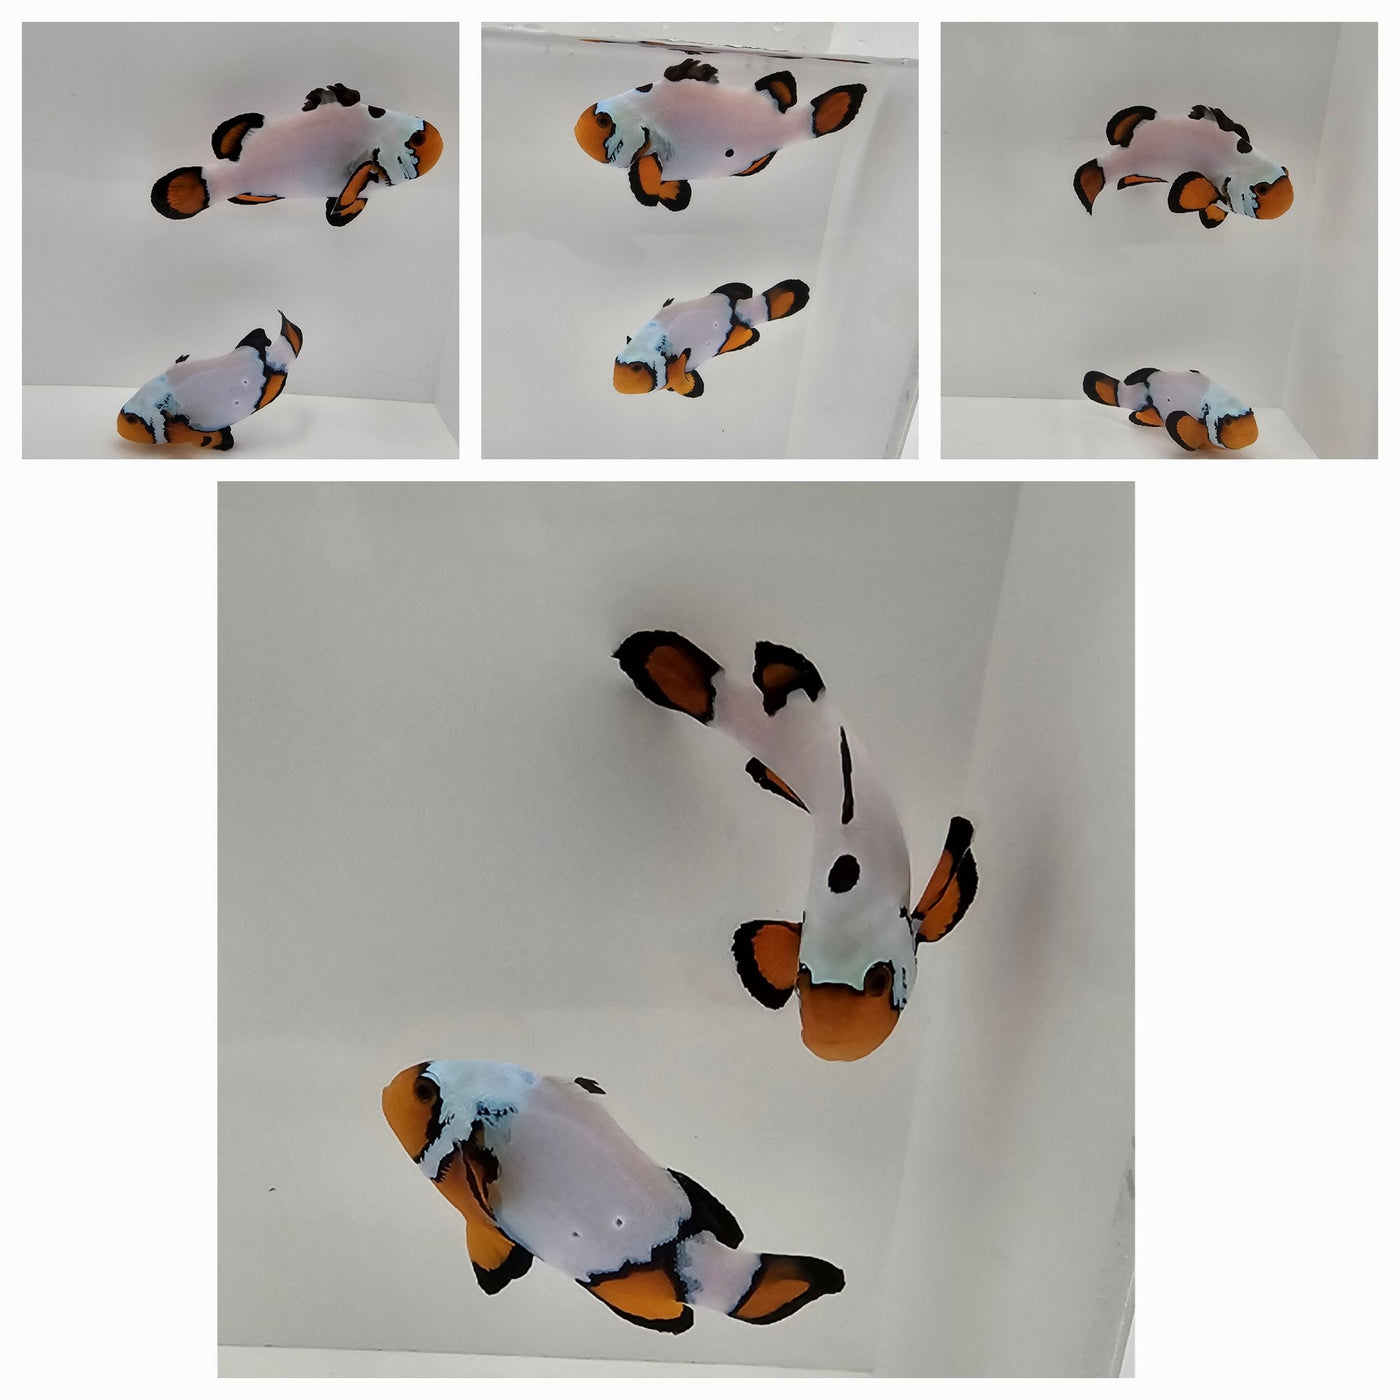 Clownfish Bonded Pair Black Ice Special